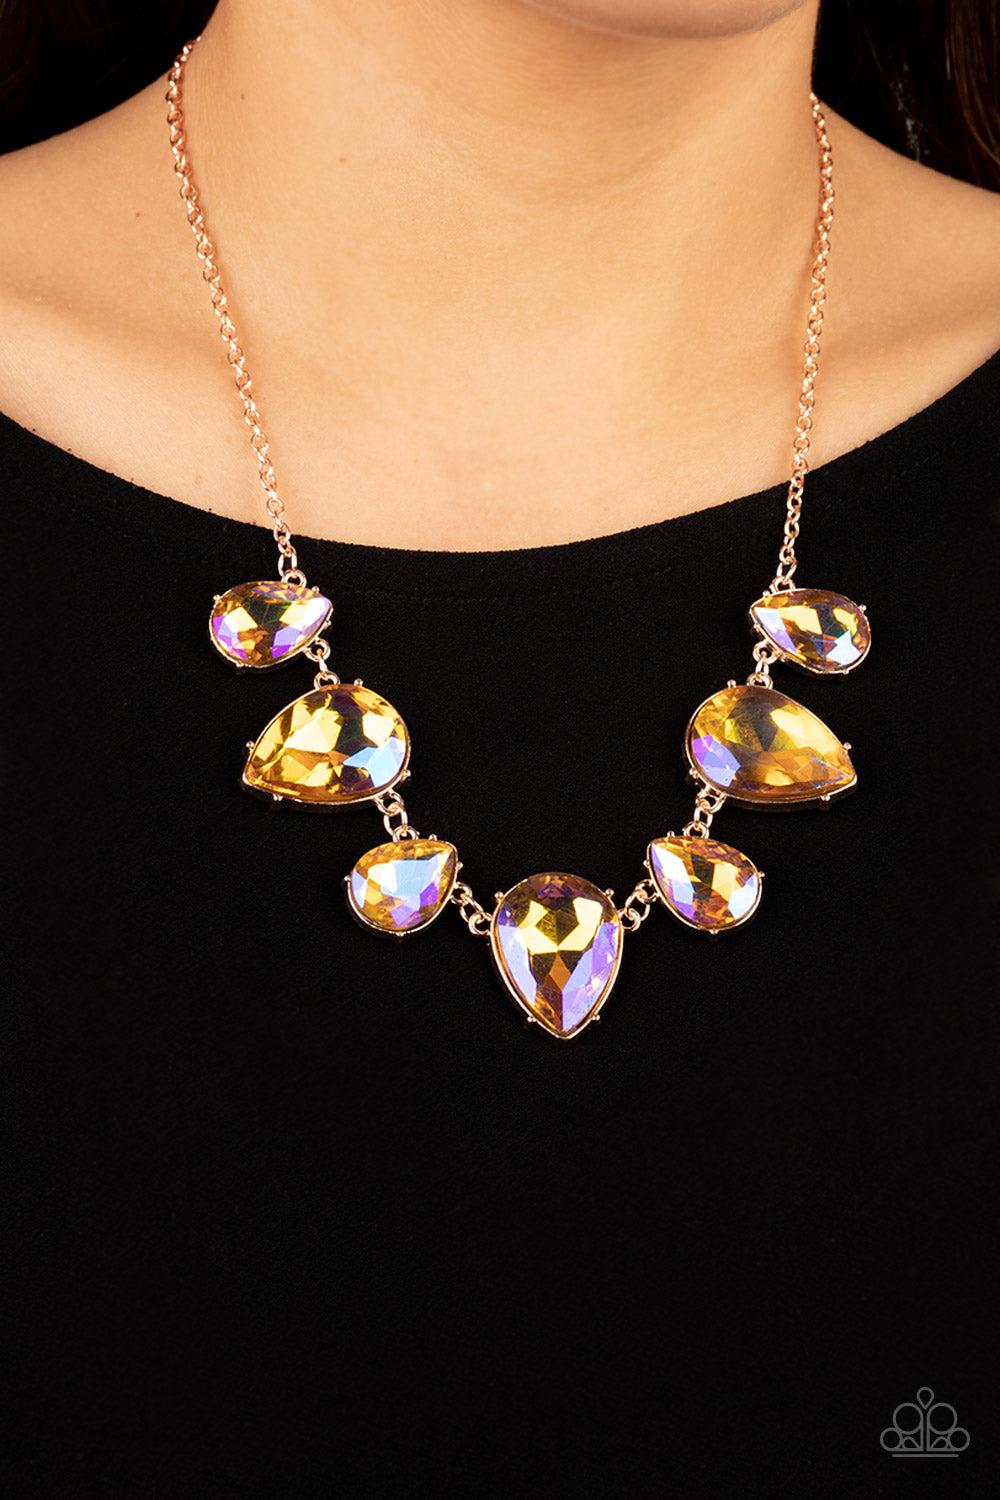 Otherworldly Opulence Multi Iridescent Rhinestone &amp; Gold Necklace - Paparazzi Accessories-on model - CarasShop.com - $5 Jewelry by Cara Jewels